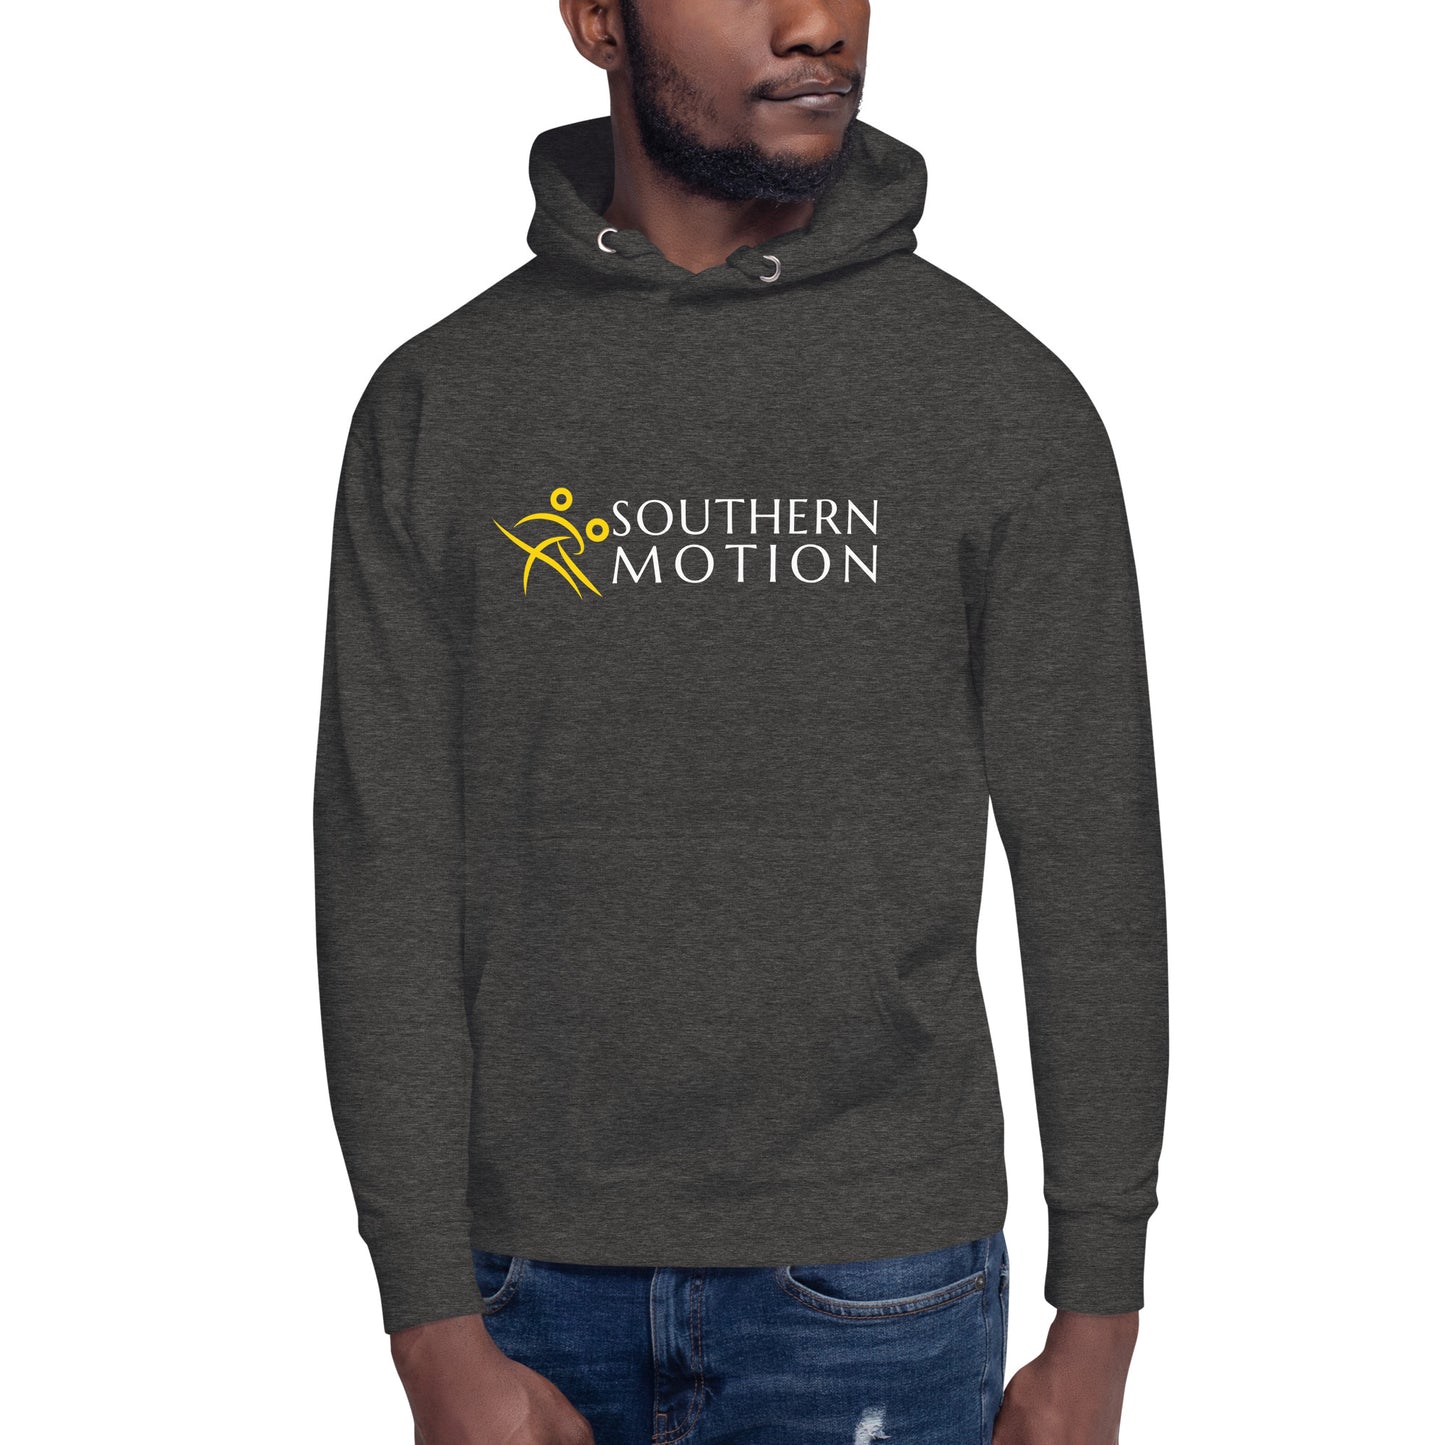 Southern Motion Hoodie